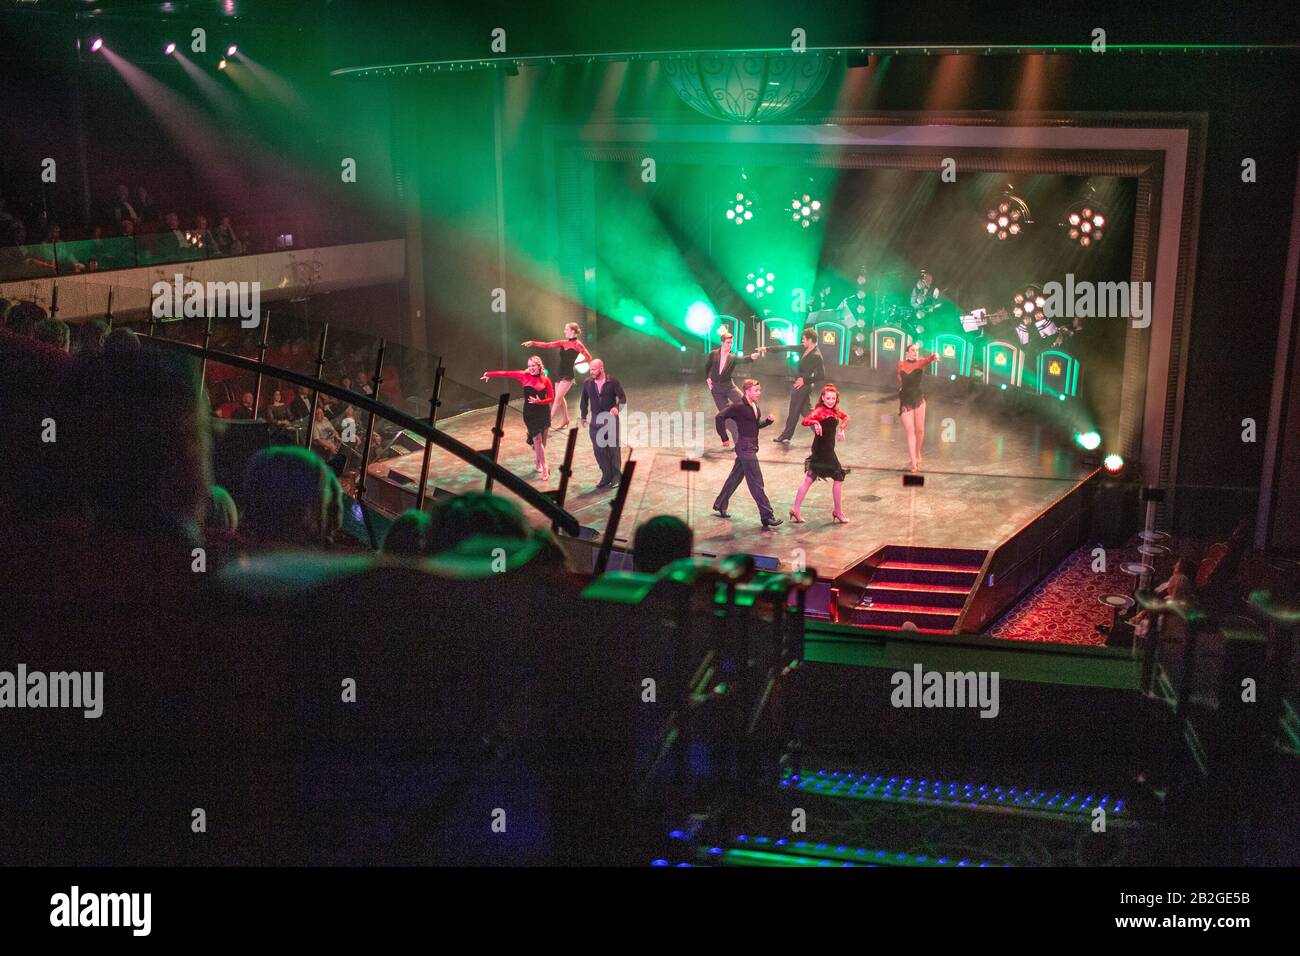 Dancers perform their colourful evening routine on a cruise ship in a small theatre in front of a mature crowd of passengers. Stock Photo